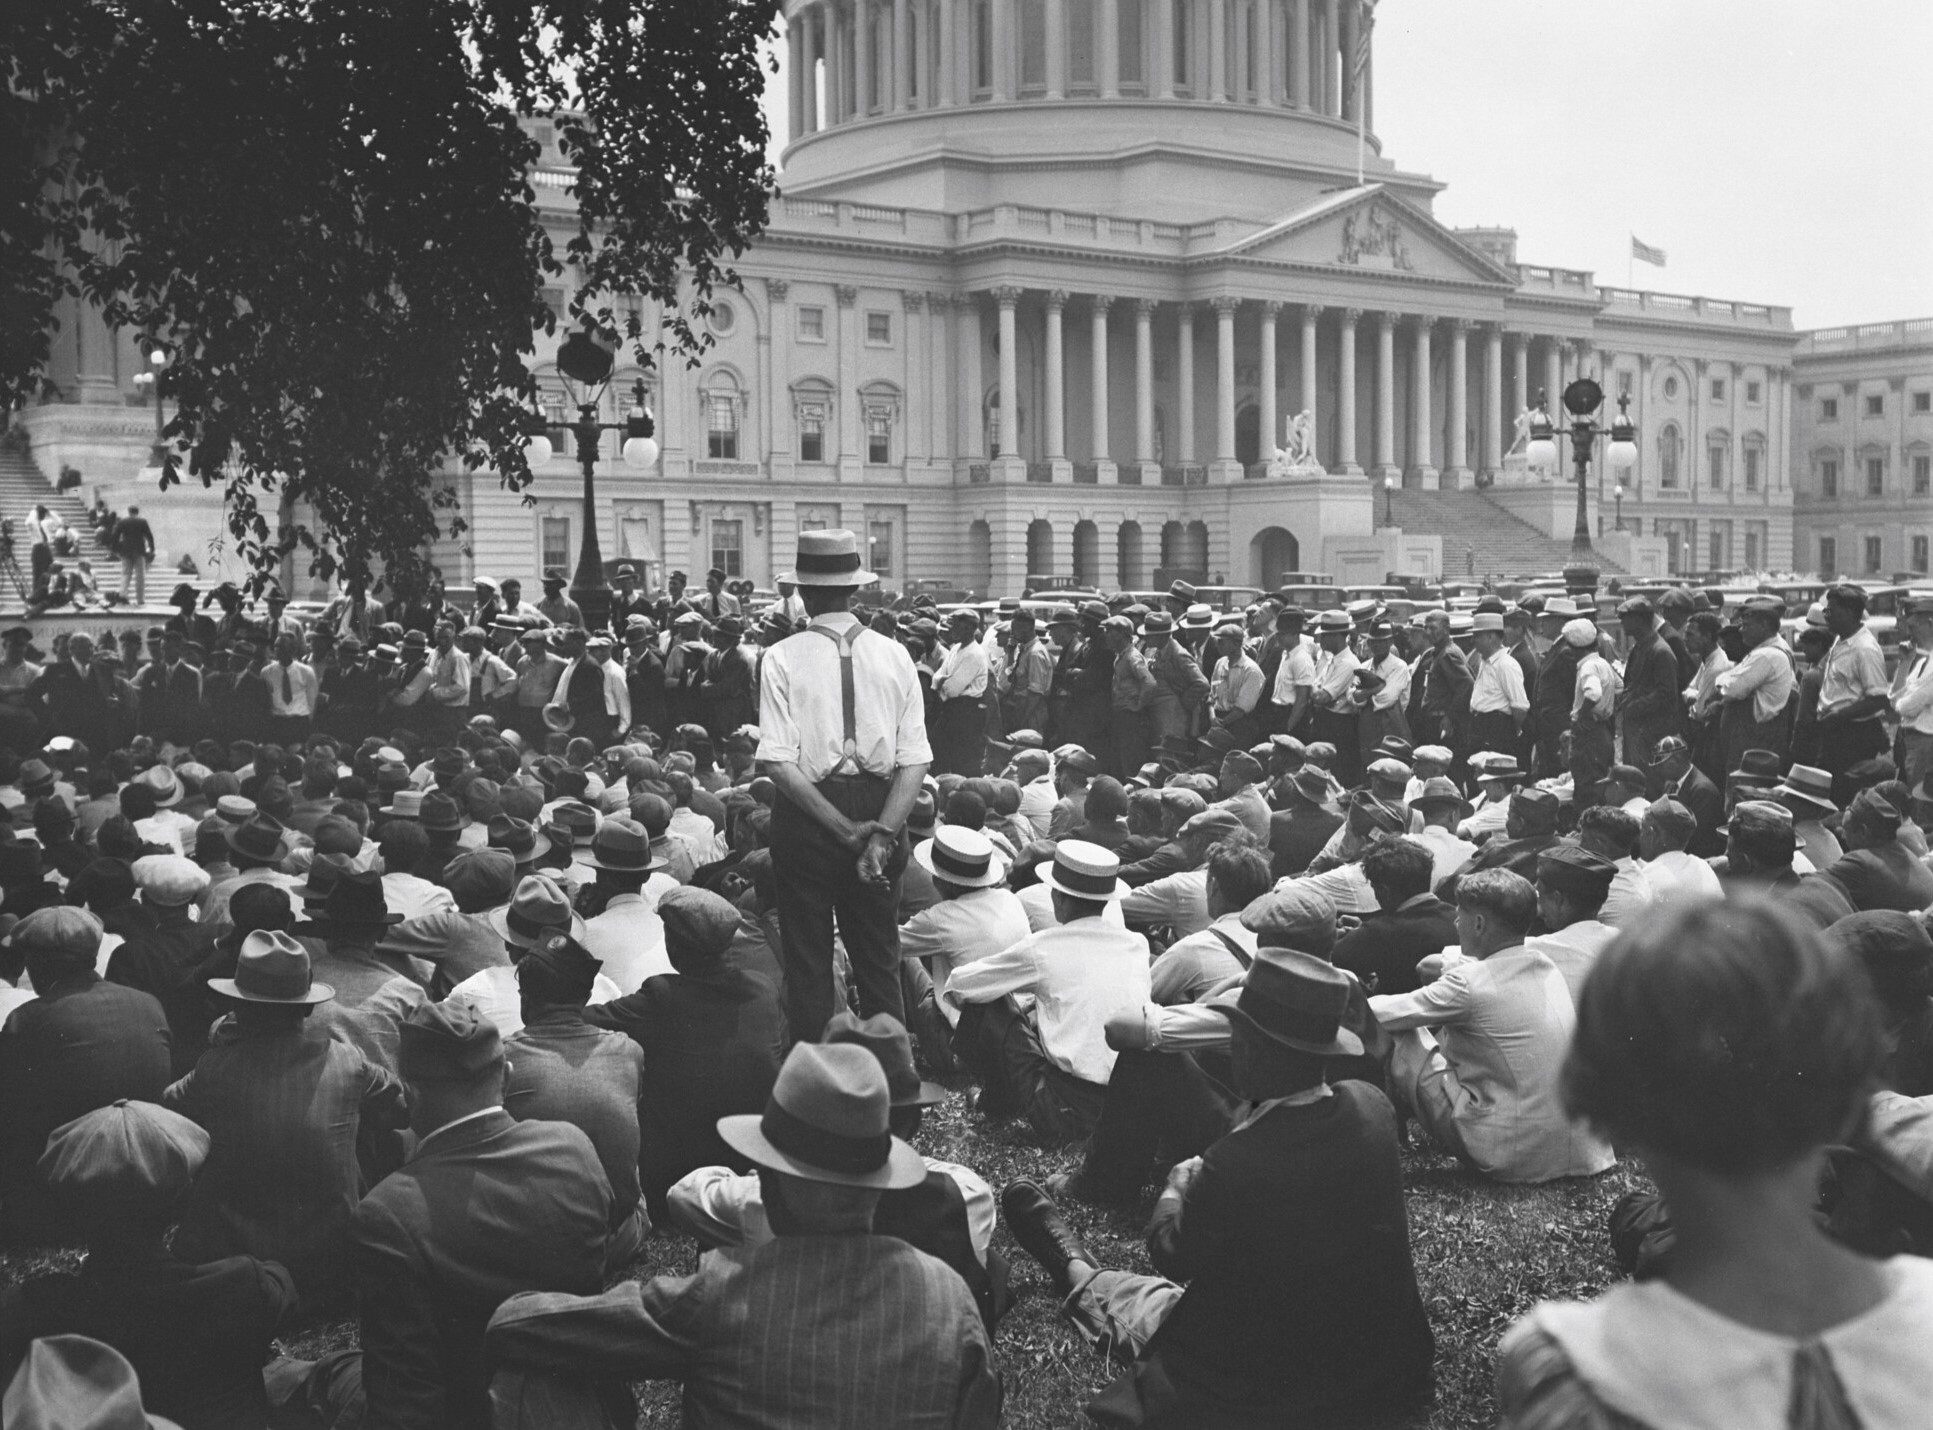 Bonus marchers rally at the Capitol, mid-July 1932